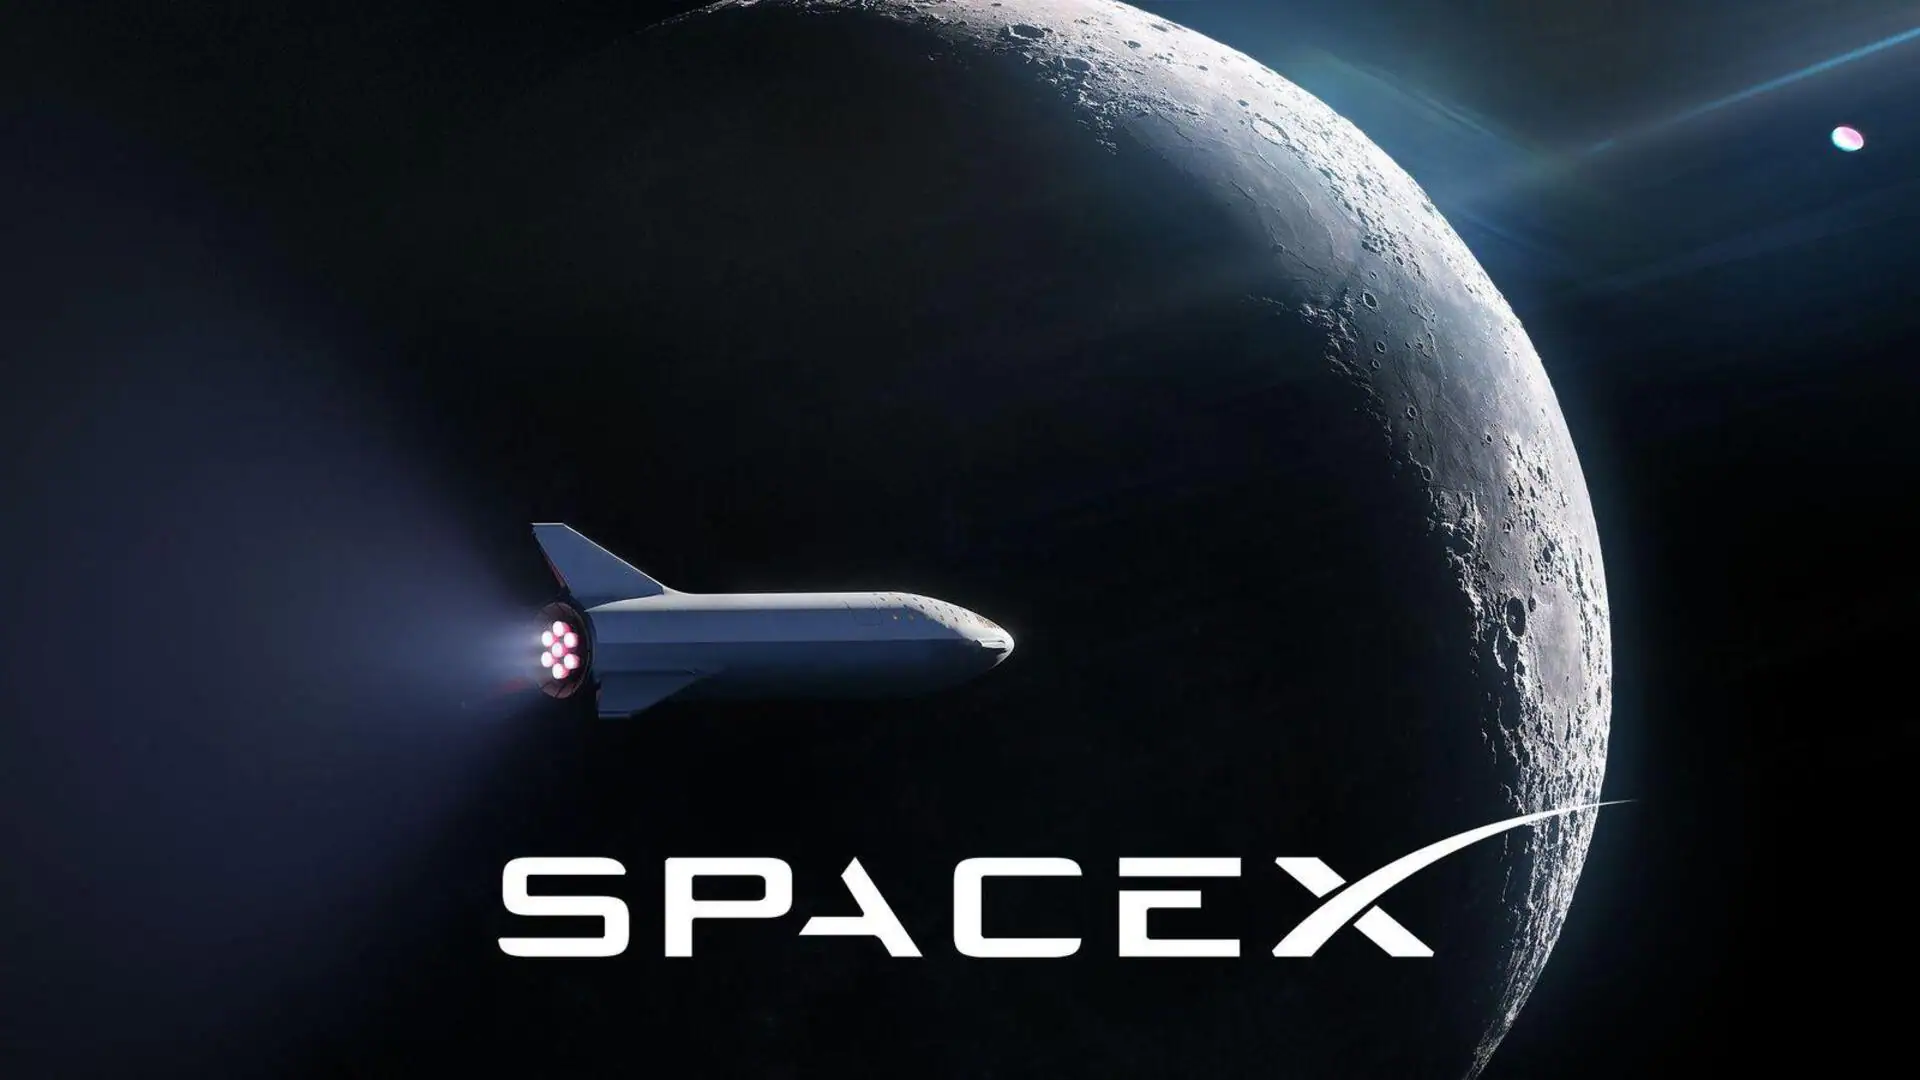 Elon Musk's SpaceX Faces New Safety Fine, Know the Insider Story Here